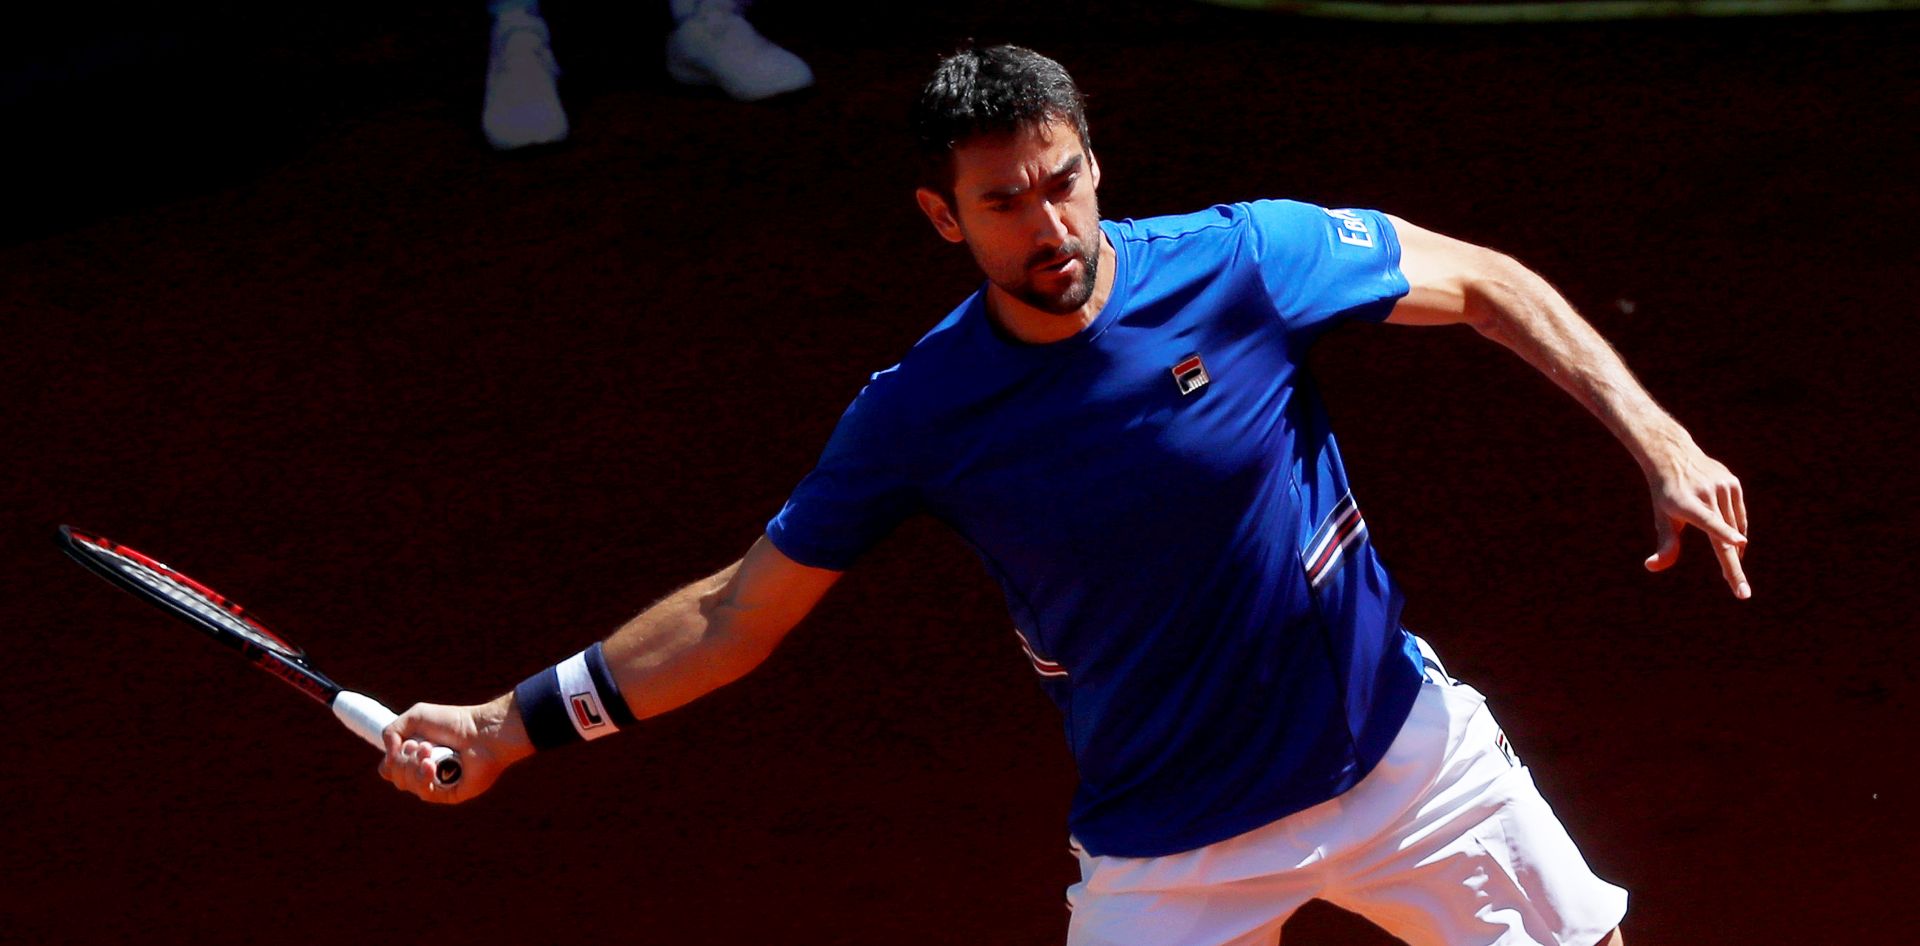 epa07557707 Marin Cilic of Croatia in action against Laslo Djere of Serbia during their third round match of the Mutua Madrid Open tennis tournament at the Caja Magica complex in Madrid, Spain, 09 May 2019.  EPA/CHEMA MOYA